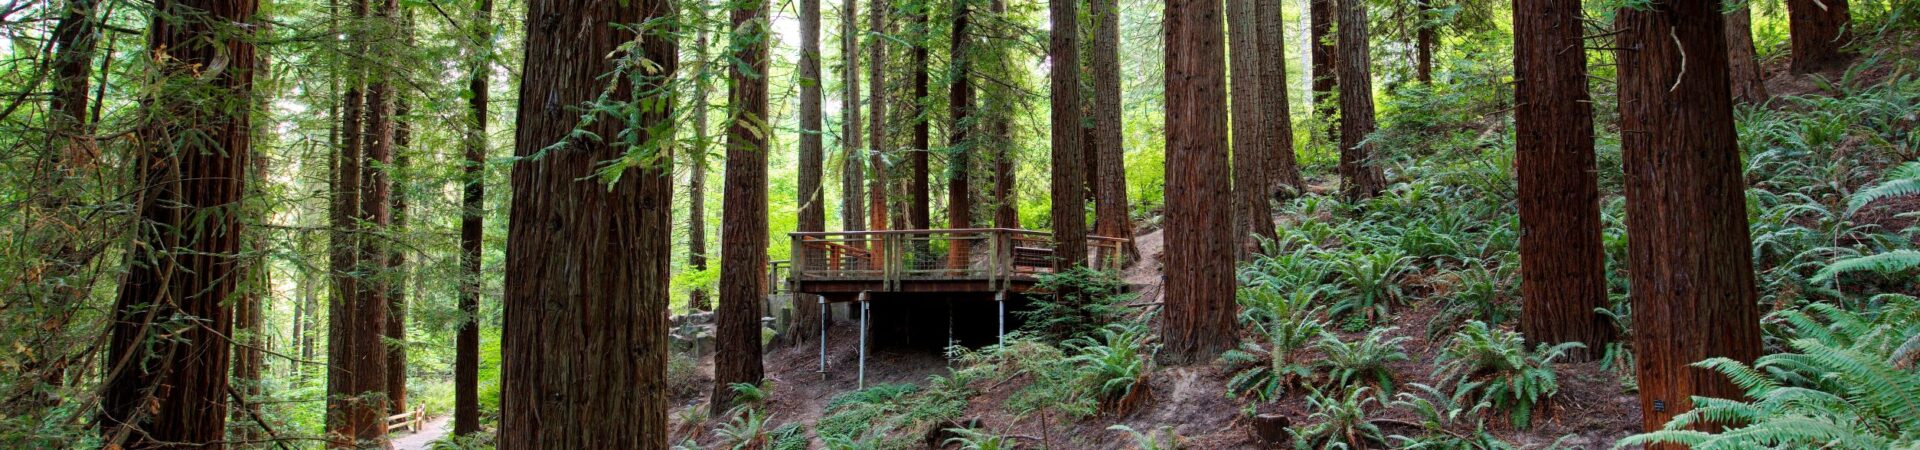 Tall slender trunks of redwood trees line a trail that fades into the background and a wooden deck sits in the middle background of the forest scene.